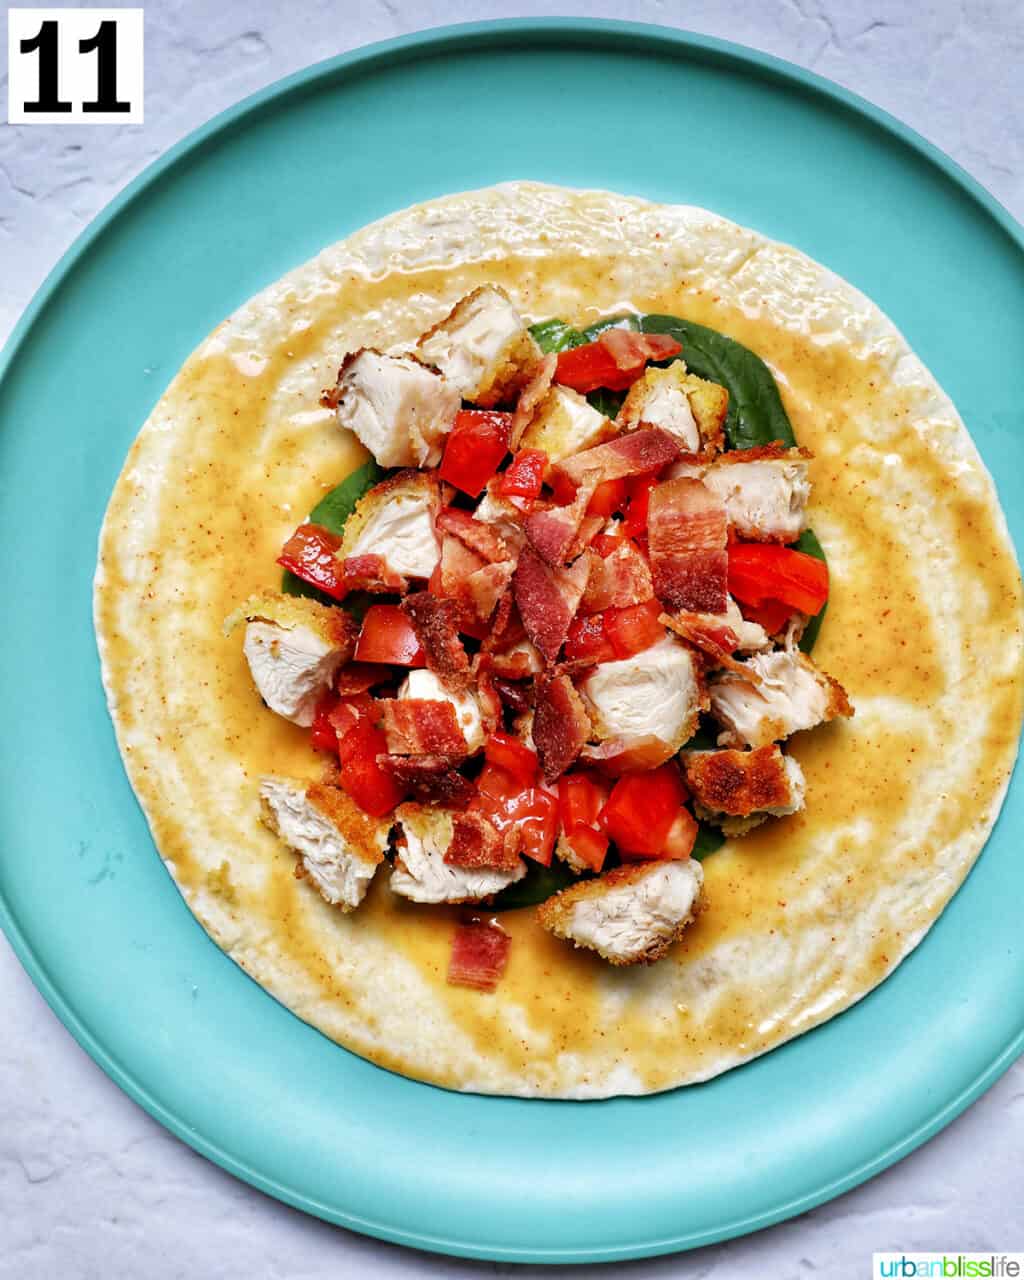 tomatoes, chicken, spinach on a tortilla wrap.